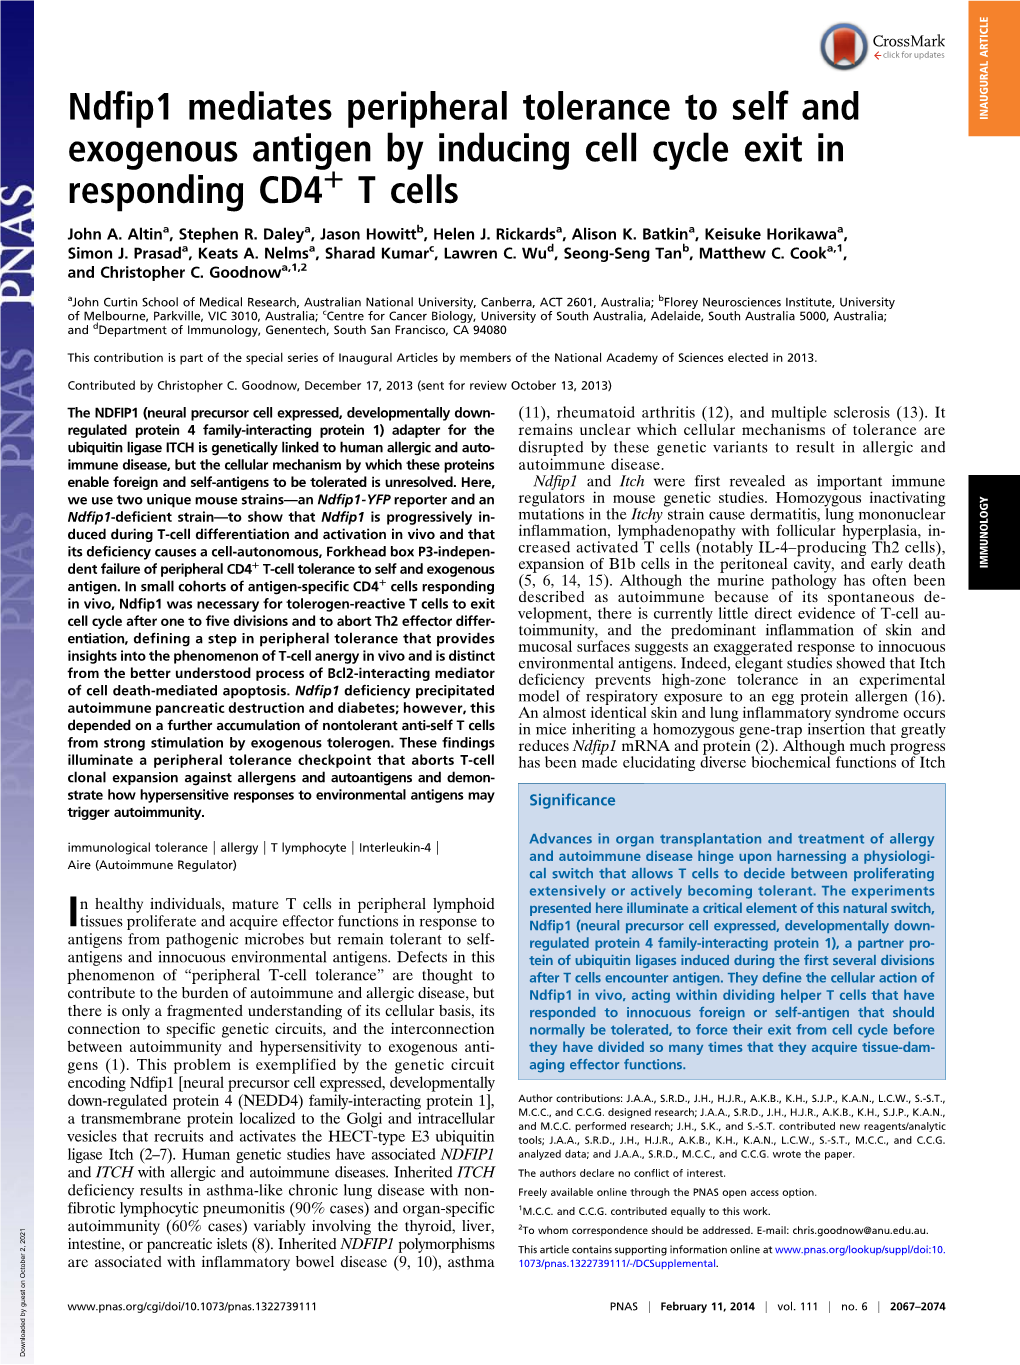 Ndfip1 Mediates Peripheral Tolerance to Self and Exogenous Antigen by Inducing Cell Cycle Exit in Responding CD4 T Cells